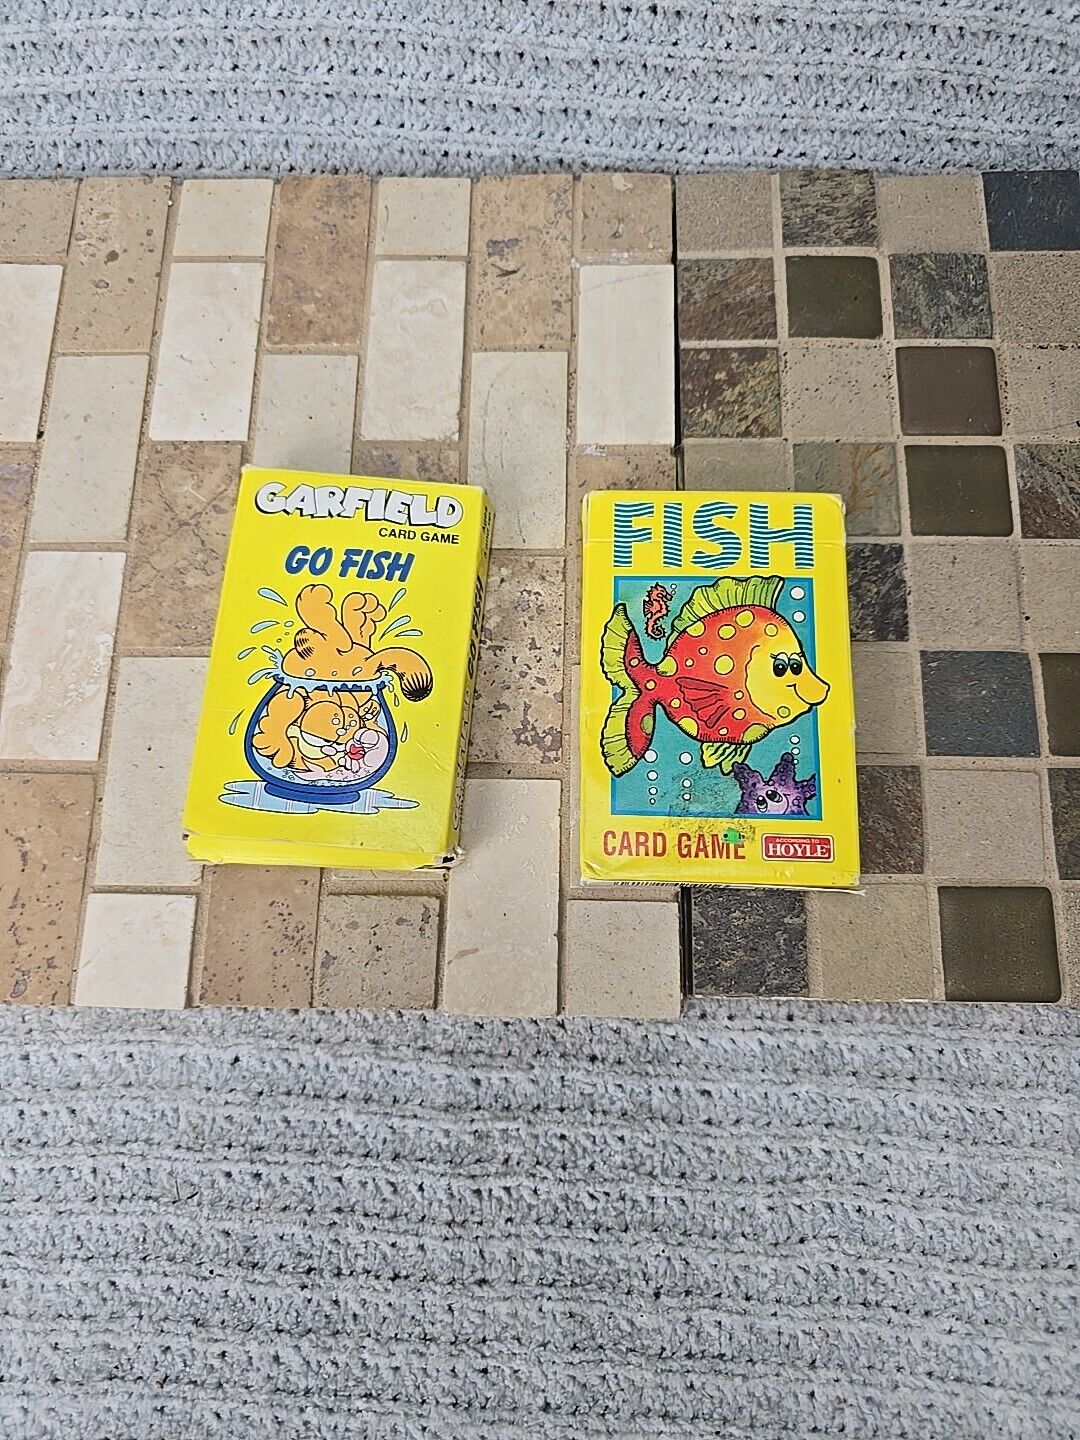 Vintage Garfield Card Game GO FISH 1978 Bicycle Games  Plus Hoyle Fish game